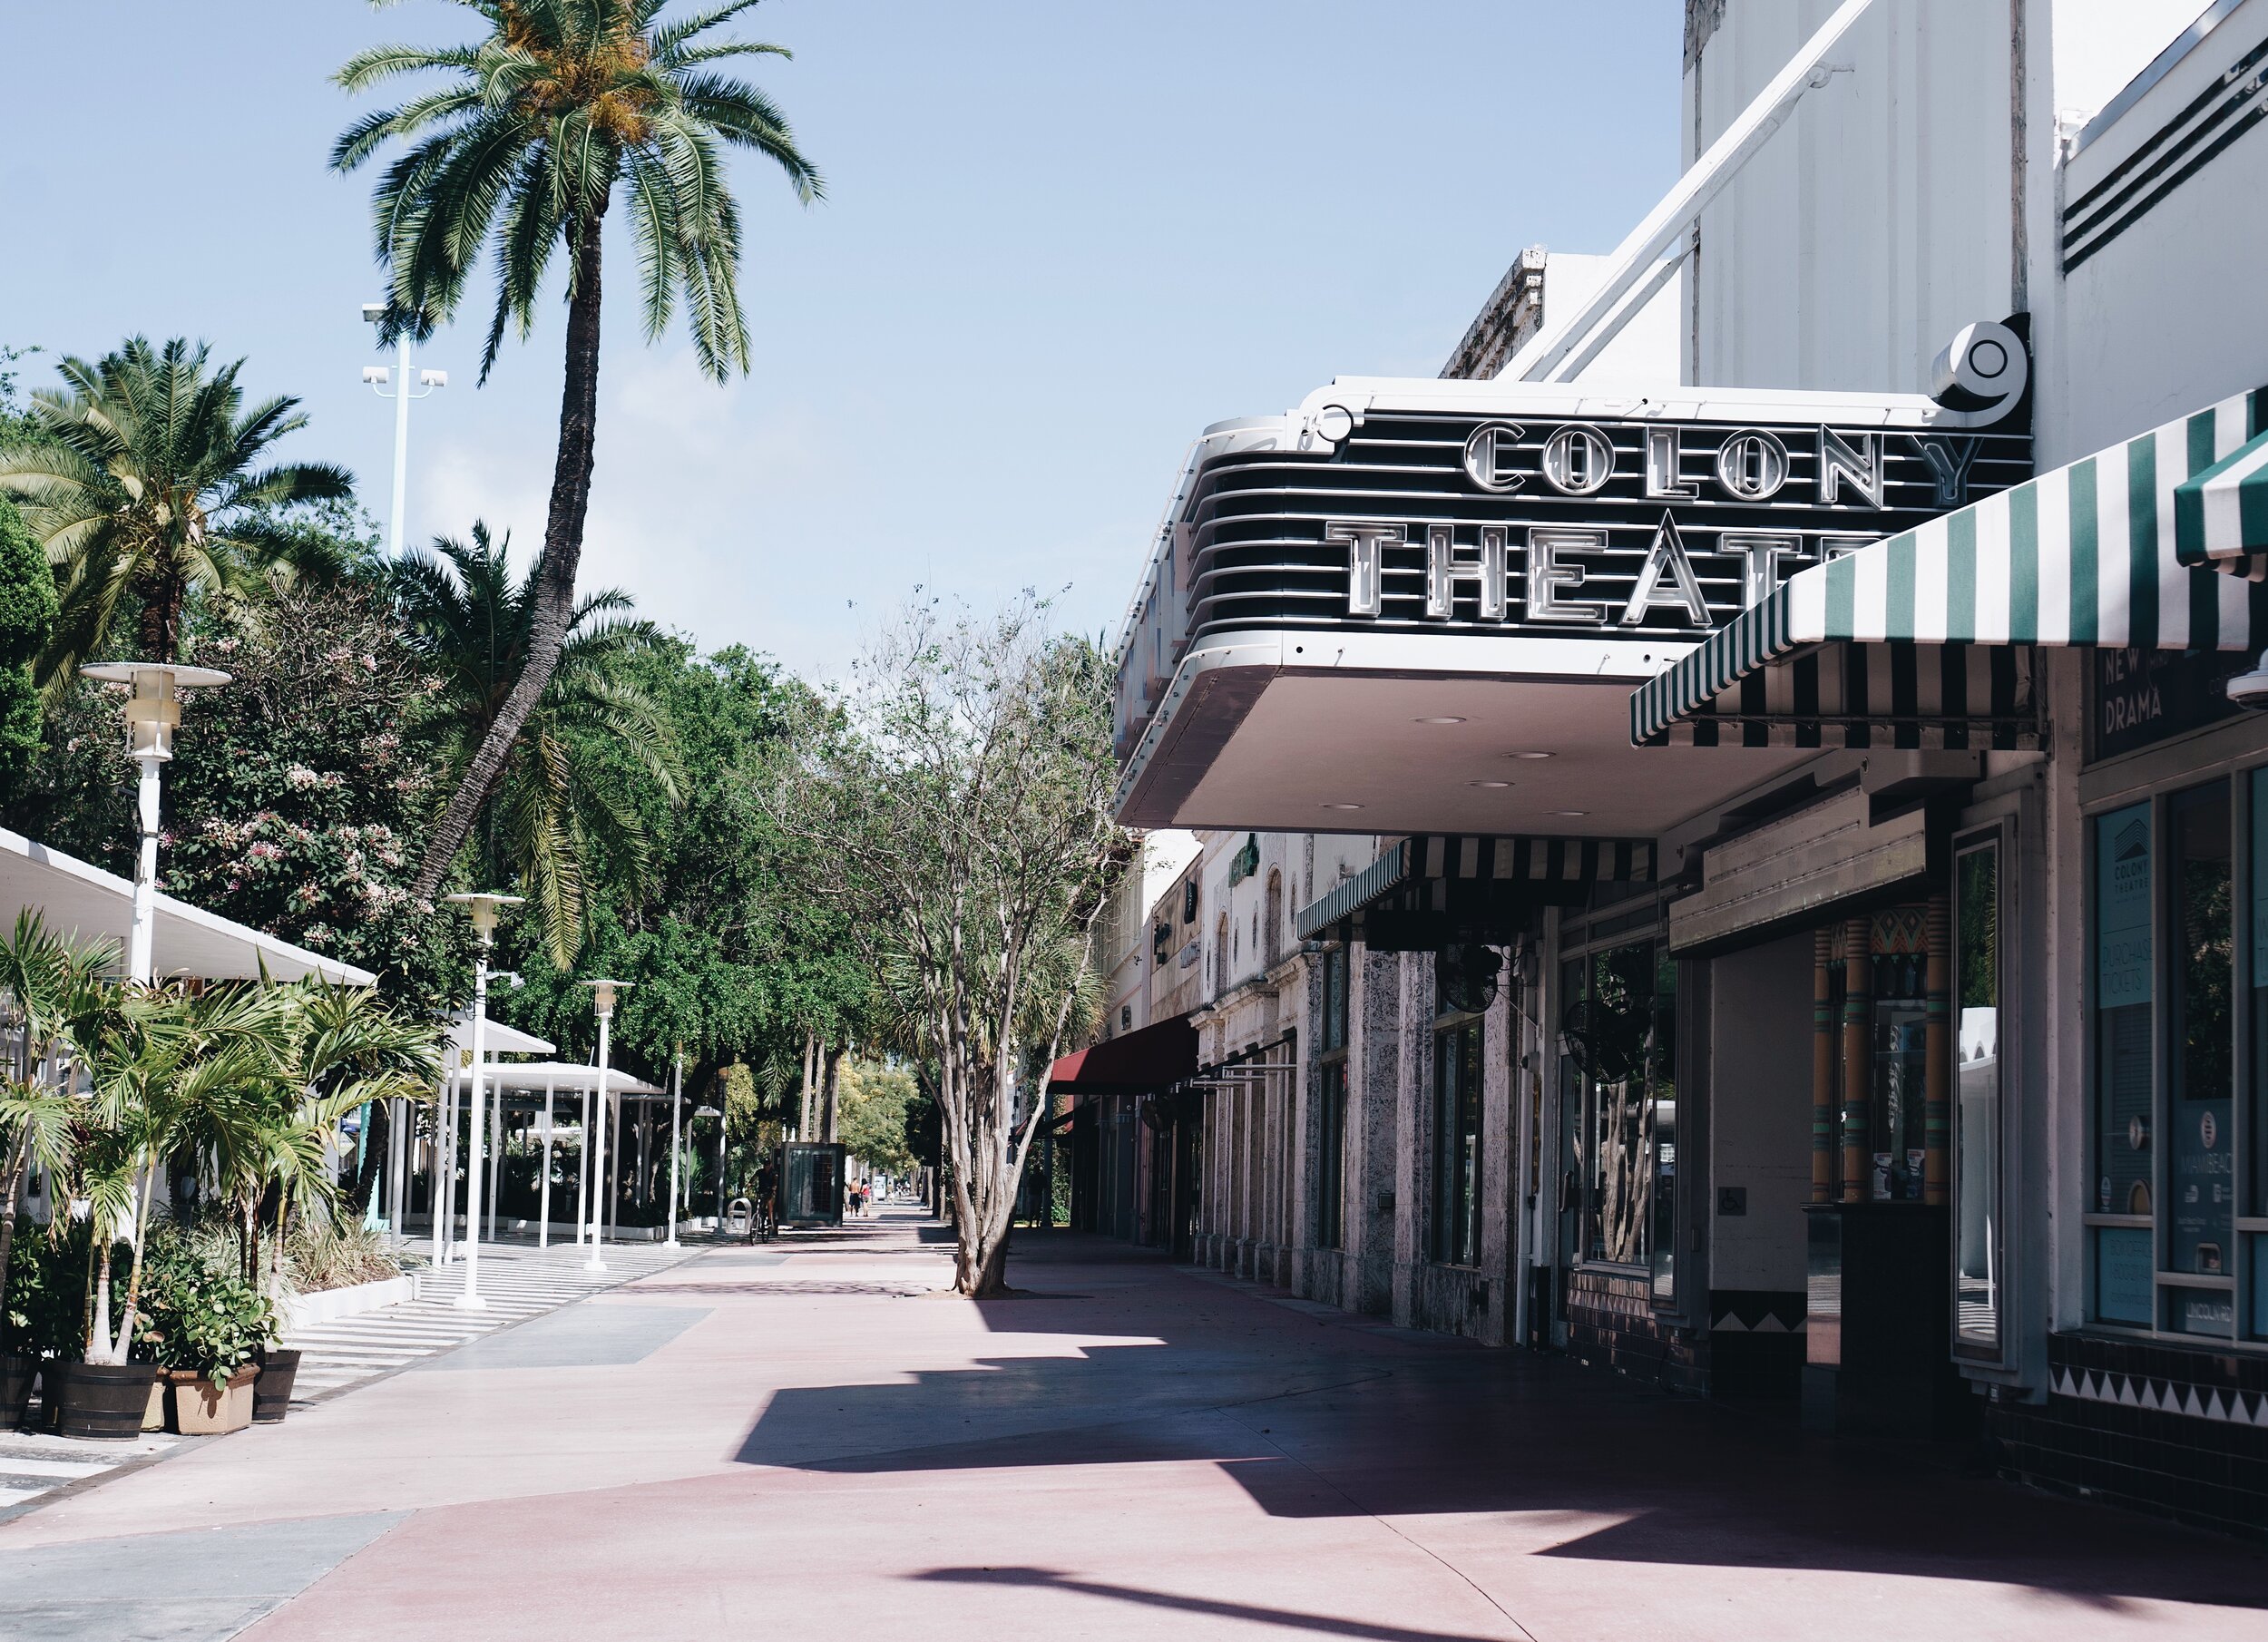 Lincoln Road. March 22, 2020